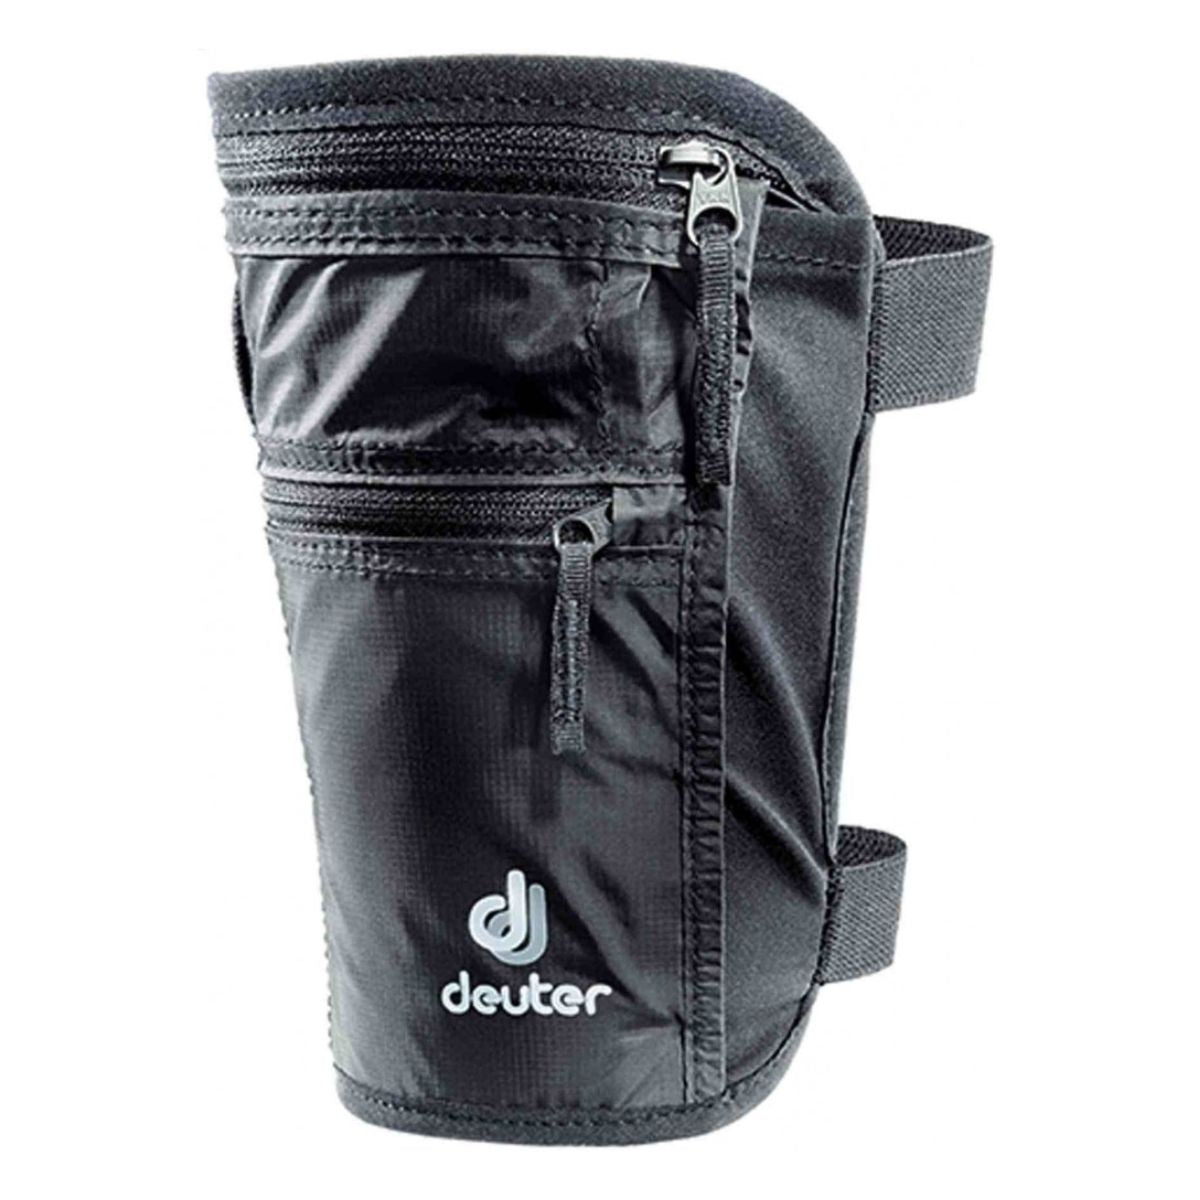 Travel Accessory Security Leg Holster Pouch